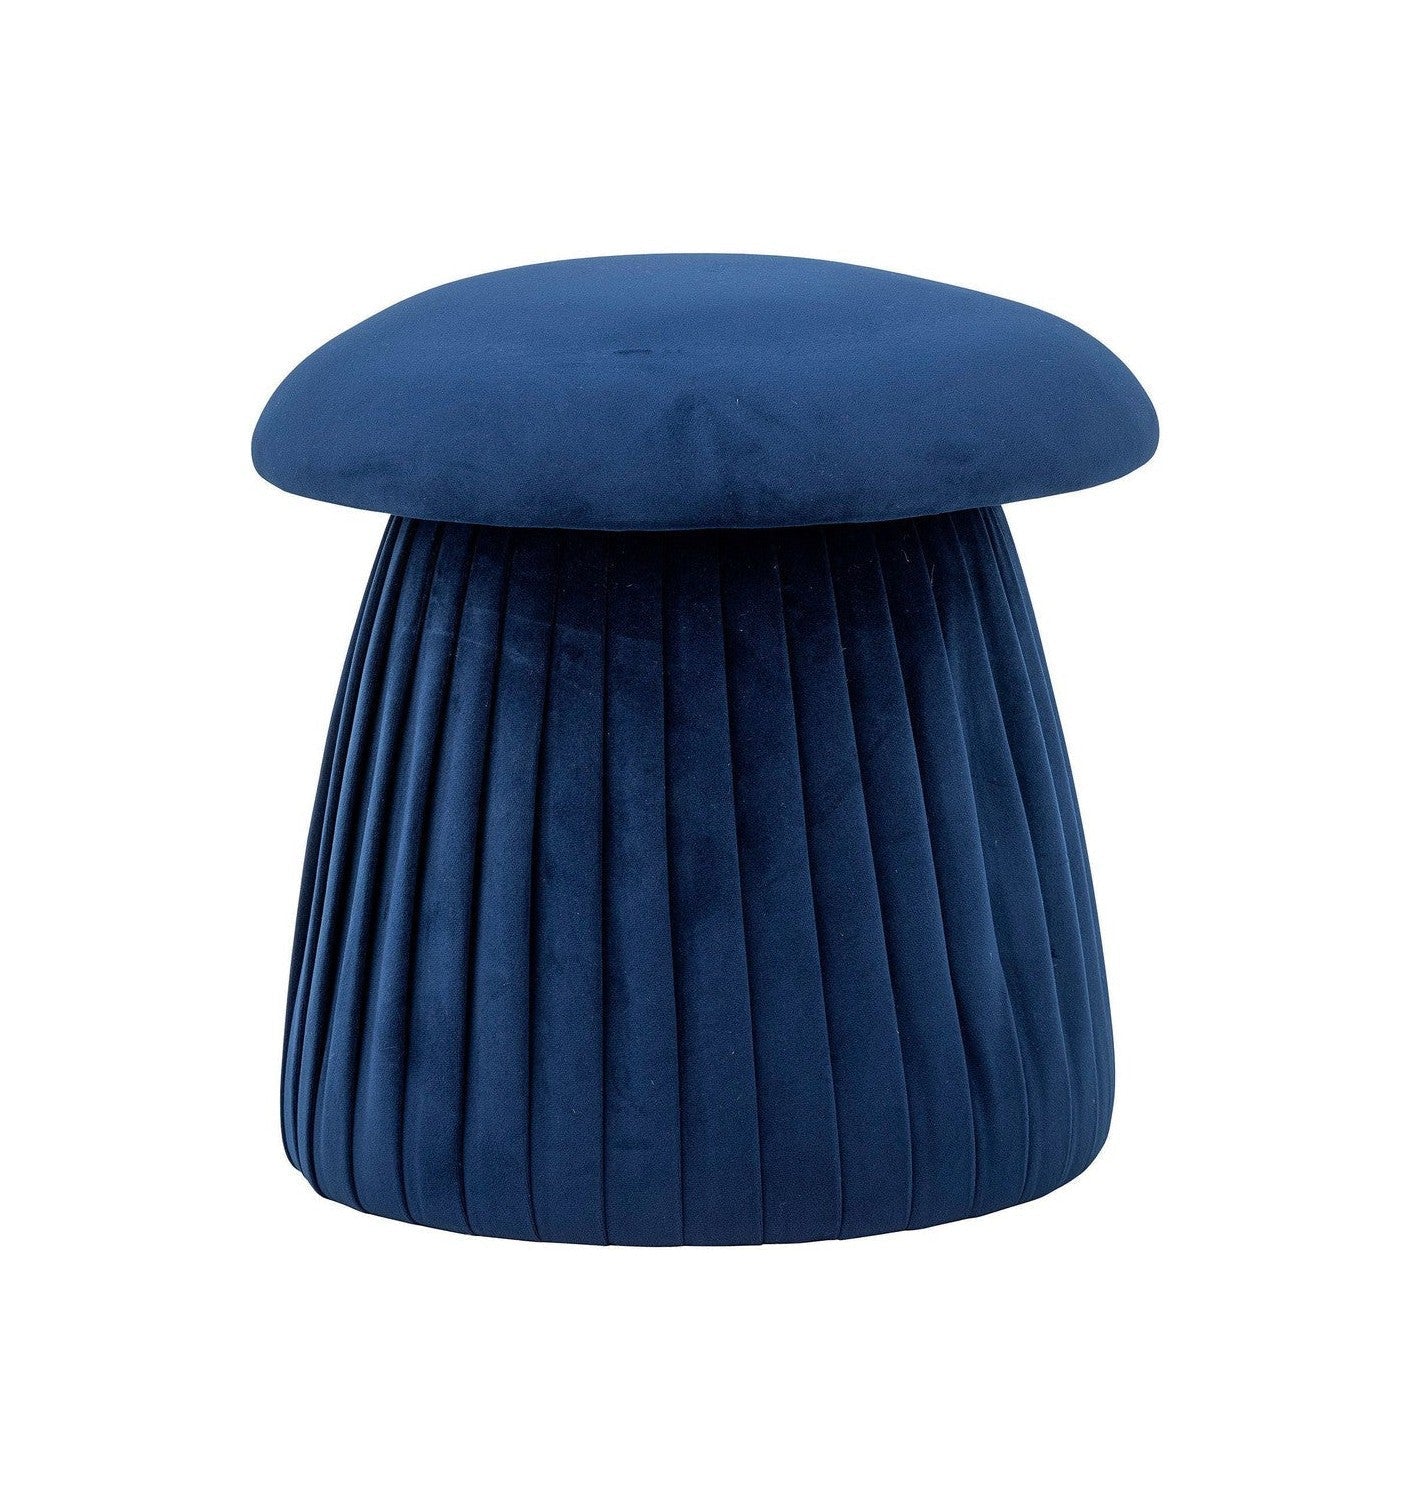 Bloomingville Roberta Pouf, Blue, Recycled Polyester